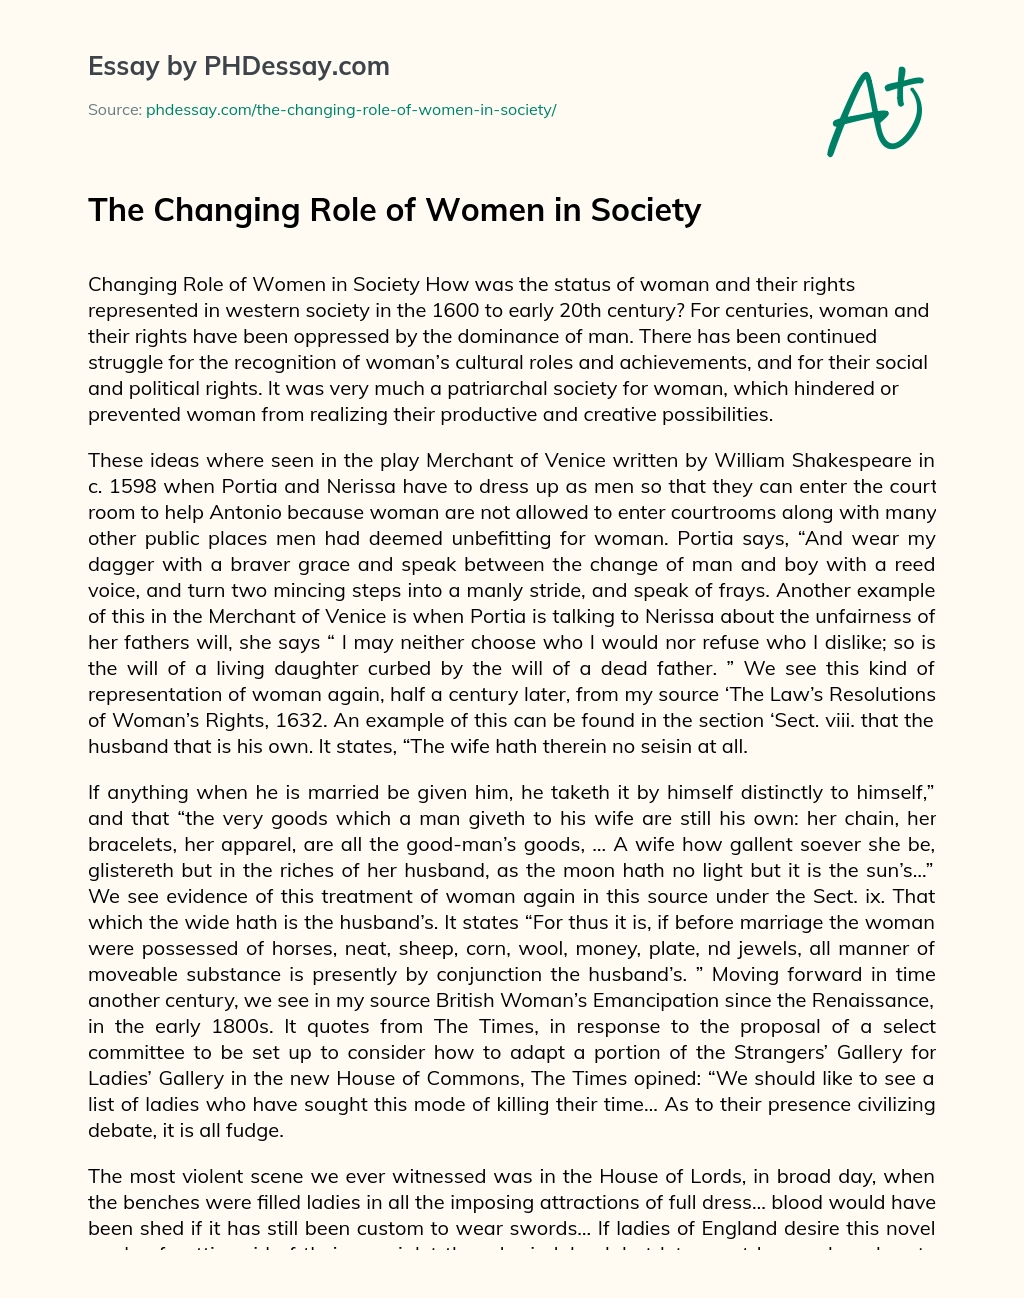 The Changing Role of Women in Society essay